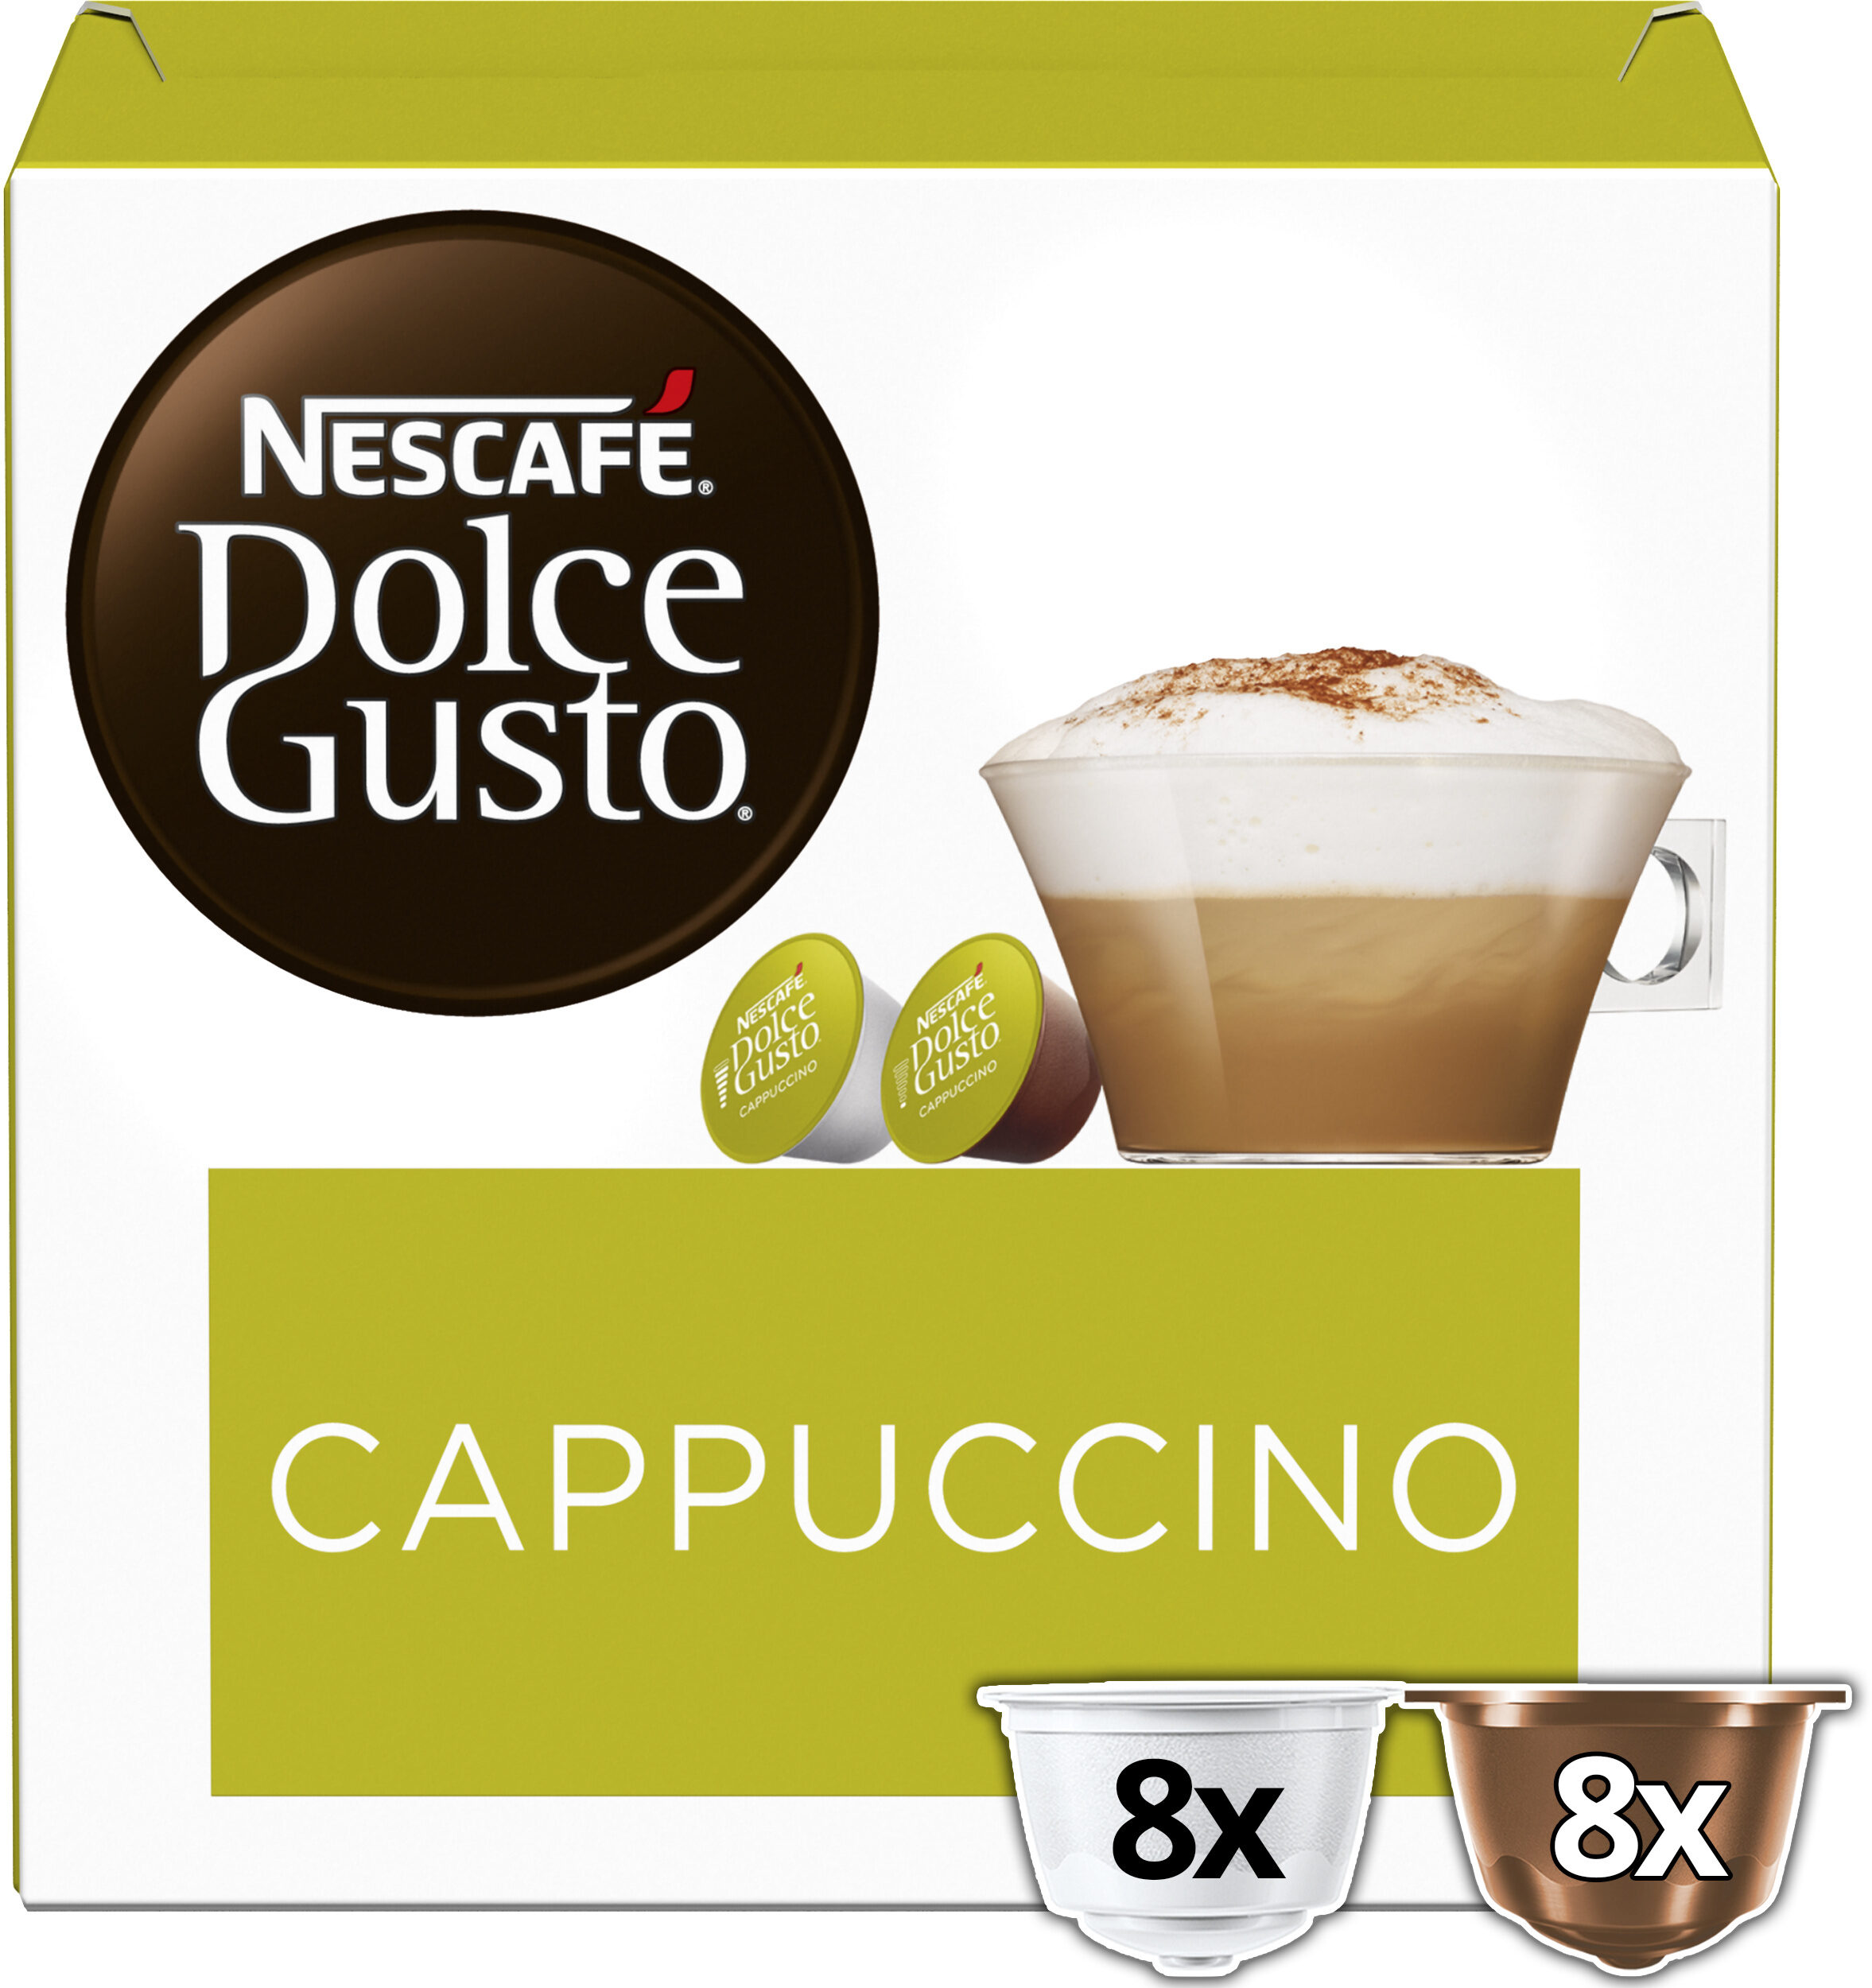 Capsules NESCAFE Dolce Gusto Cappuccino Extra Crema 16 Capsules - Produkt - fr